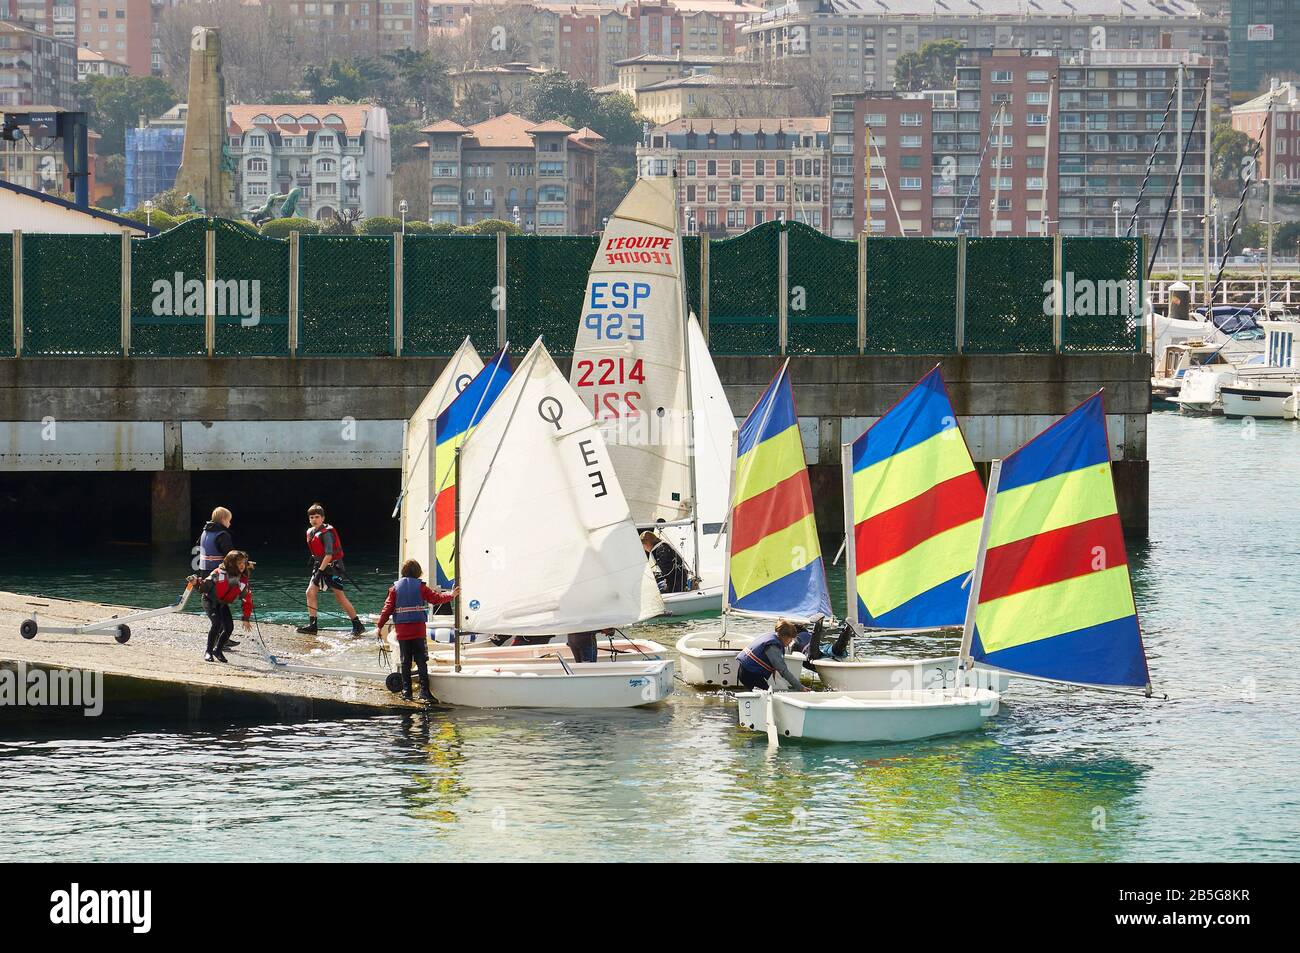 Children preparing optimist sailing boats in a boat ramp for a course at Real Club Marítimo del Abra (Las Arenas, Getxo, Biscay, Basque Country,Spain) Stock Photo